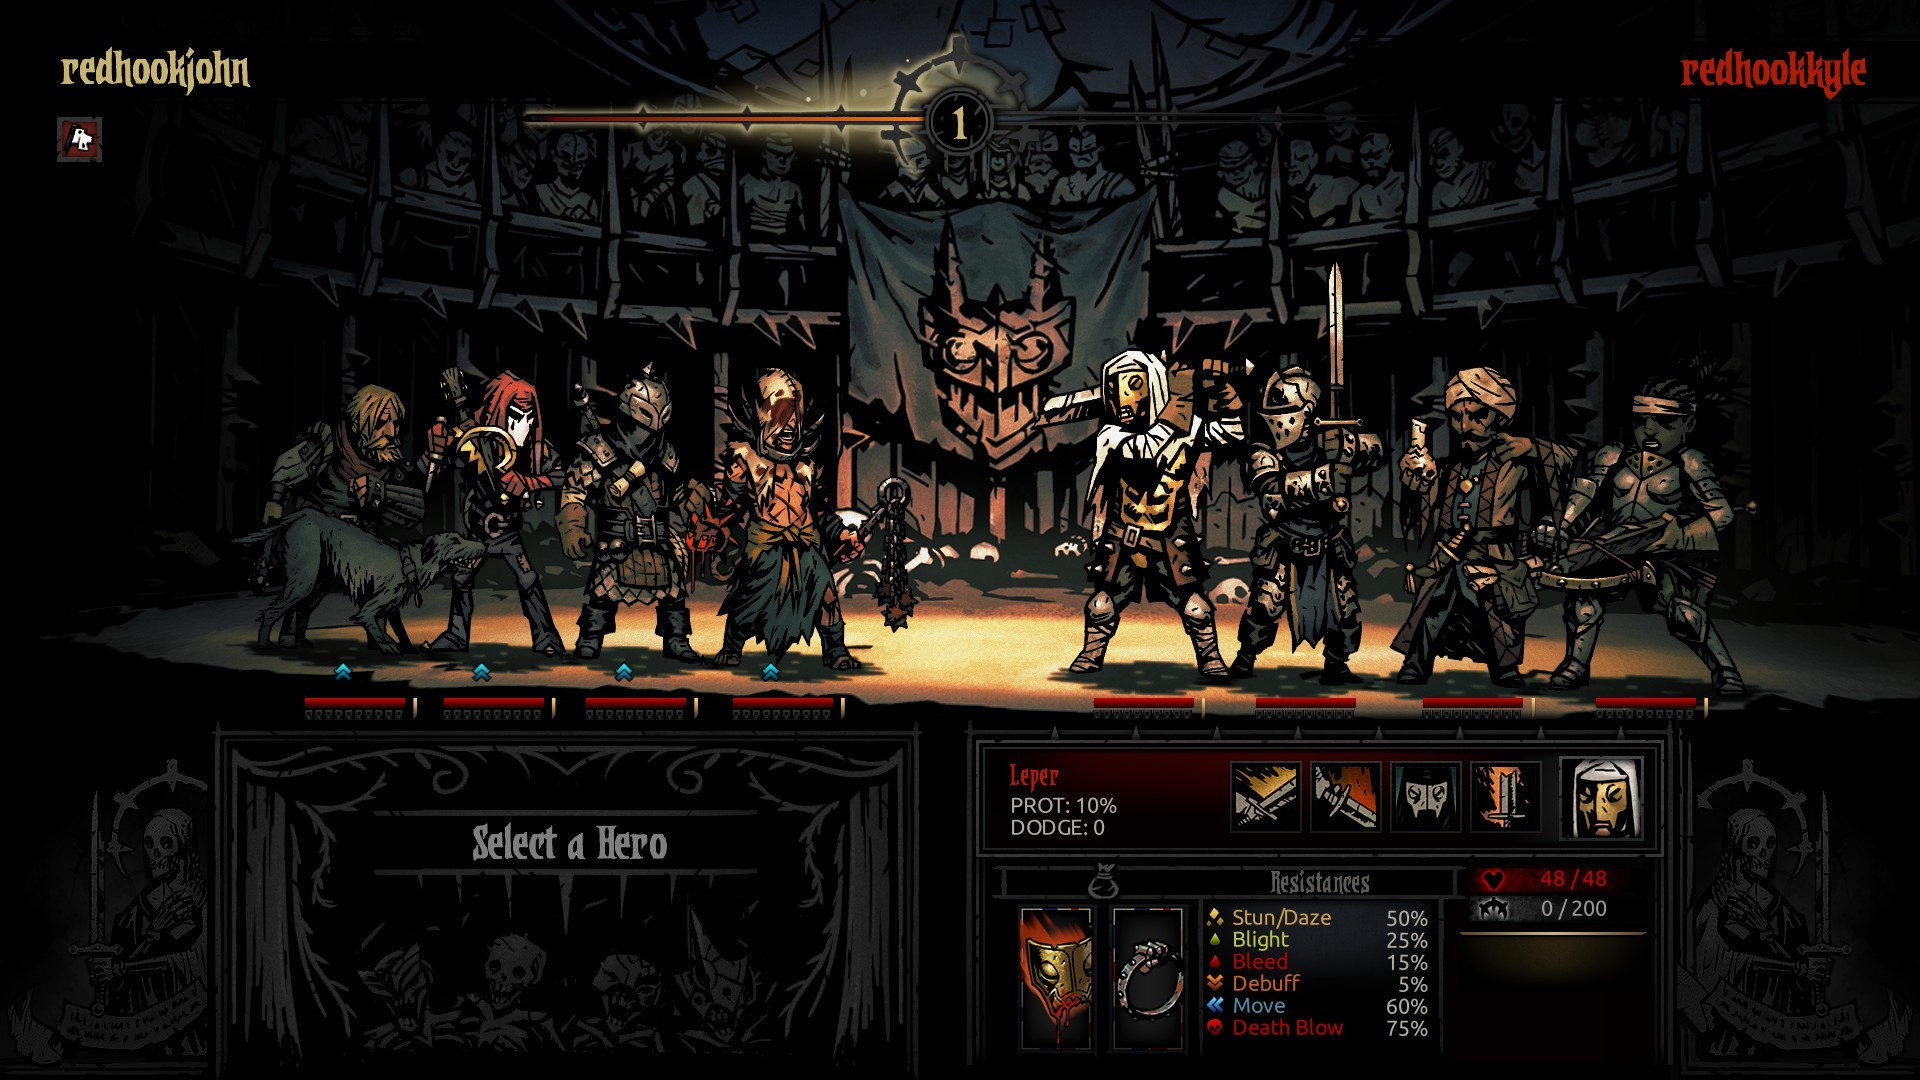 darkest dungeon how to install recolor mods?